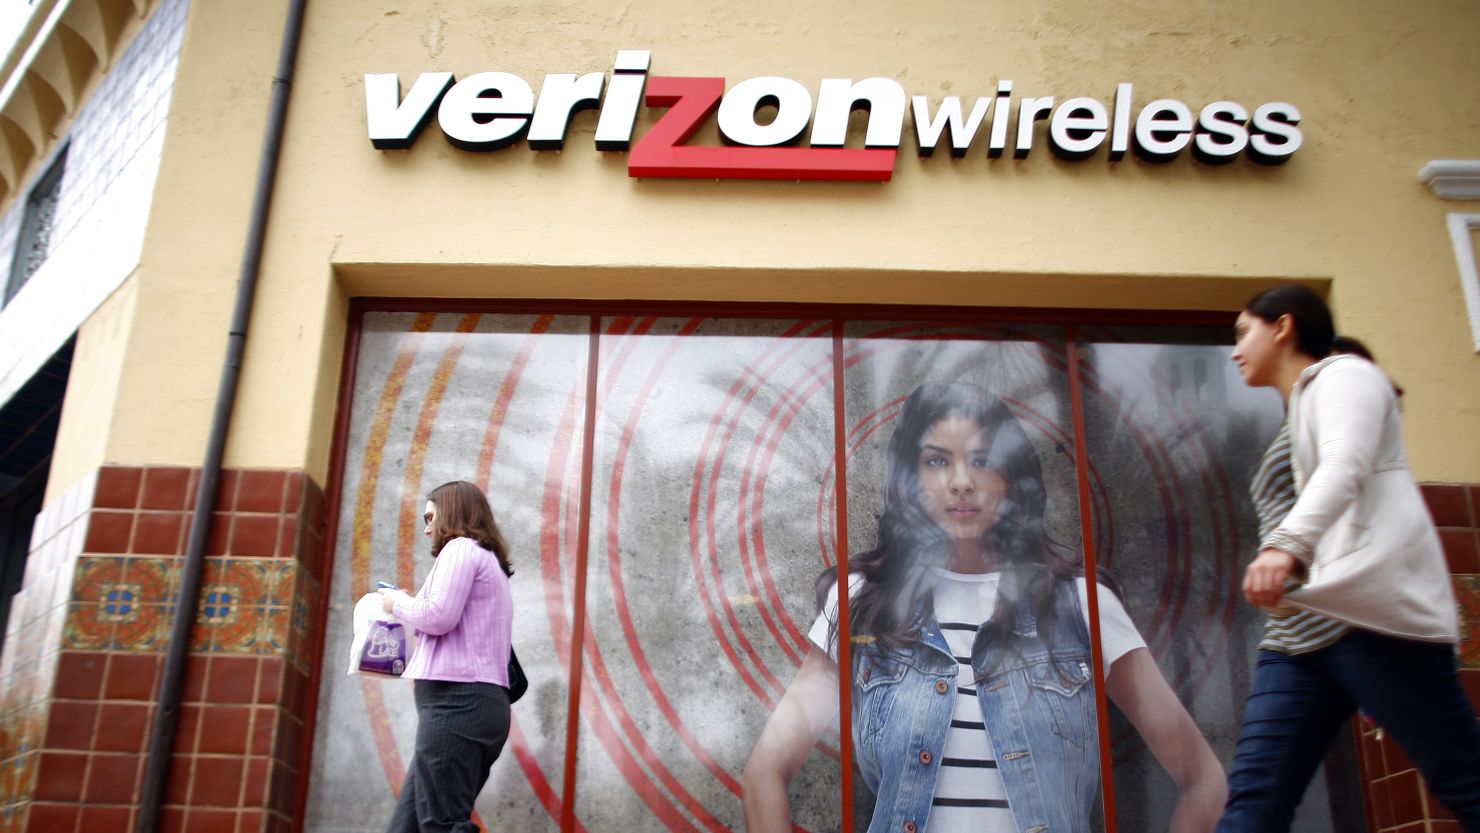 Will Verizon follow T-Mobile's lead and get rid of service contracts?